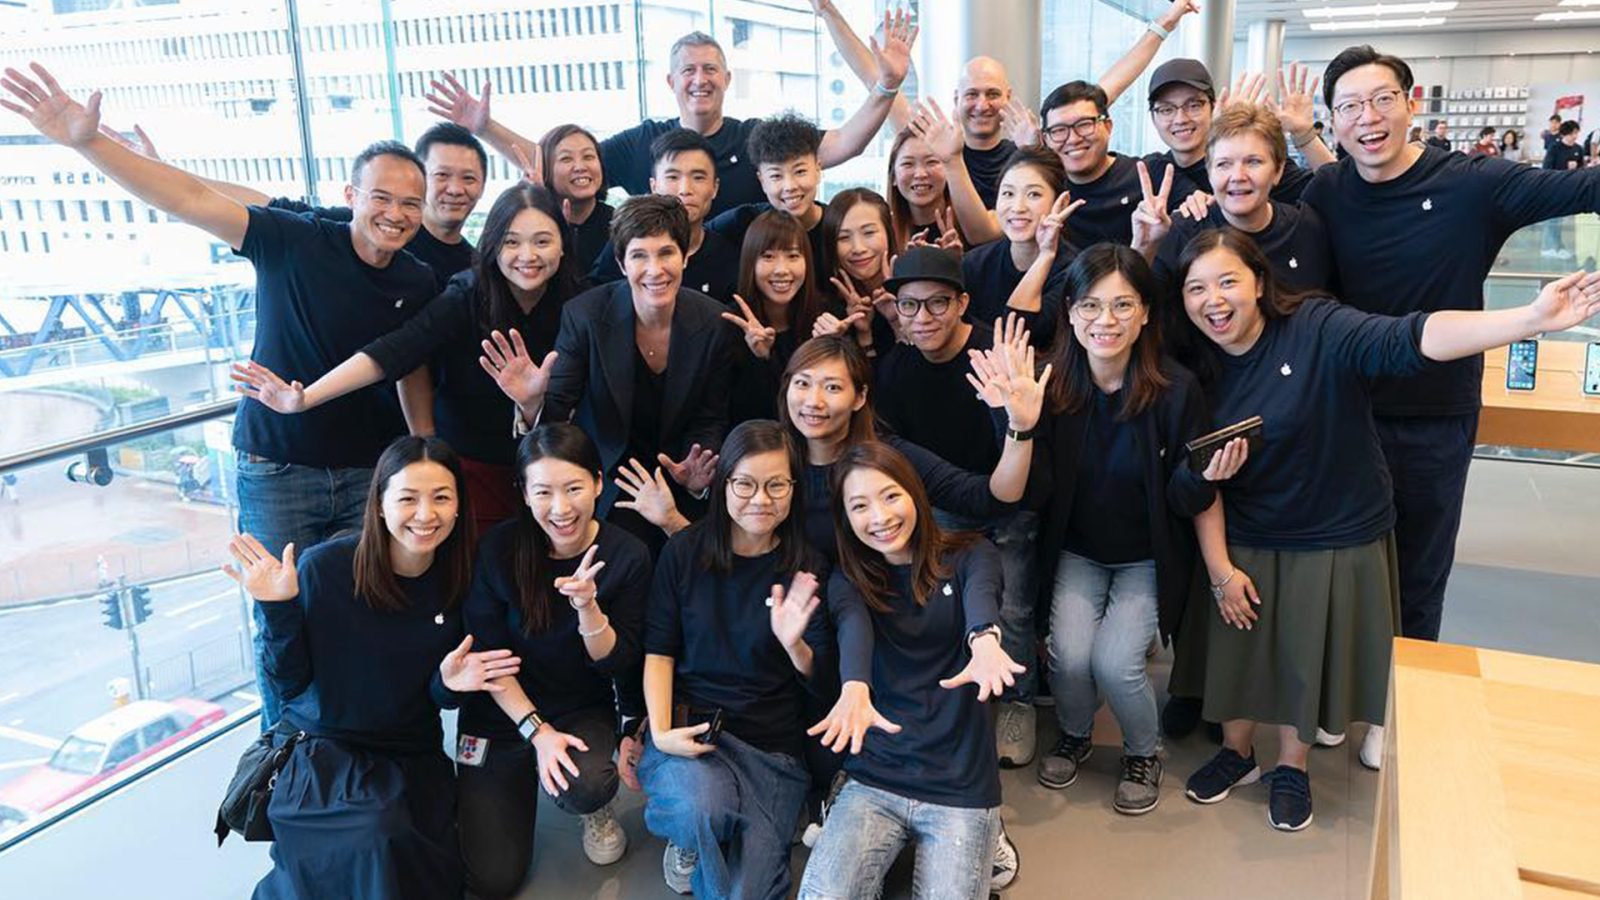 photo of Deirdre O’Brien joins Instagram to share photos from global Apple Store tour image